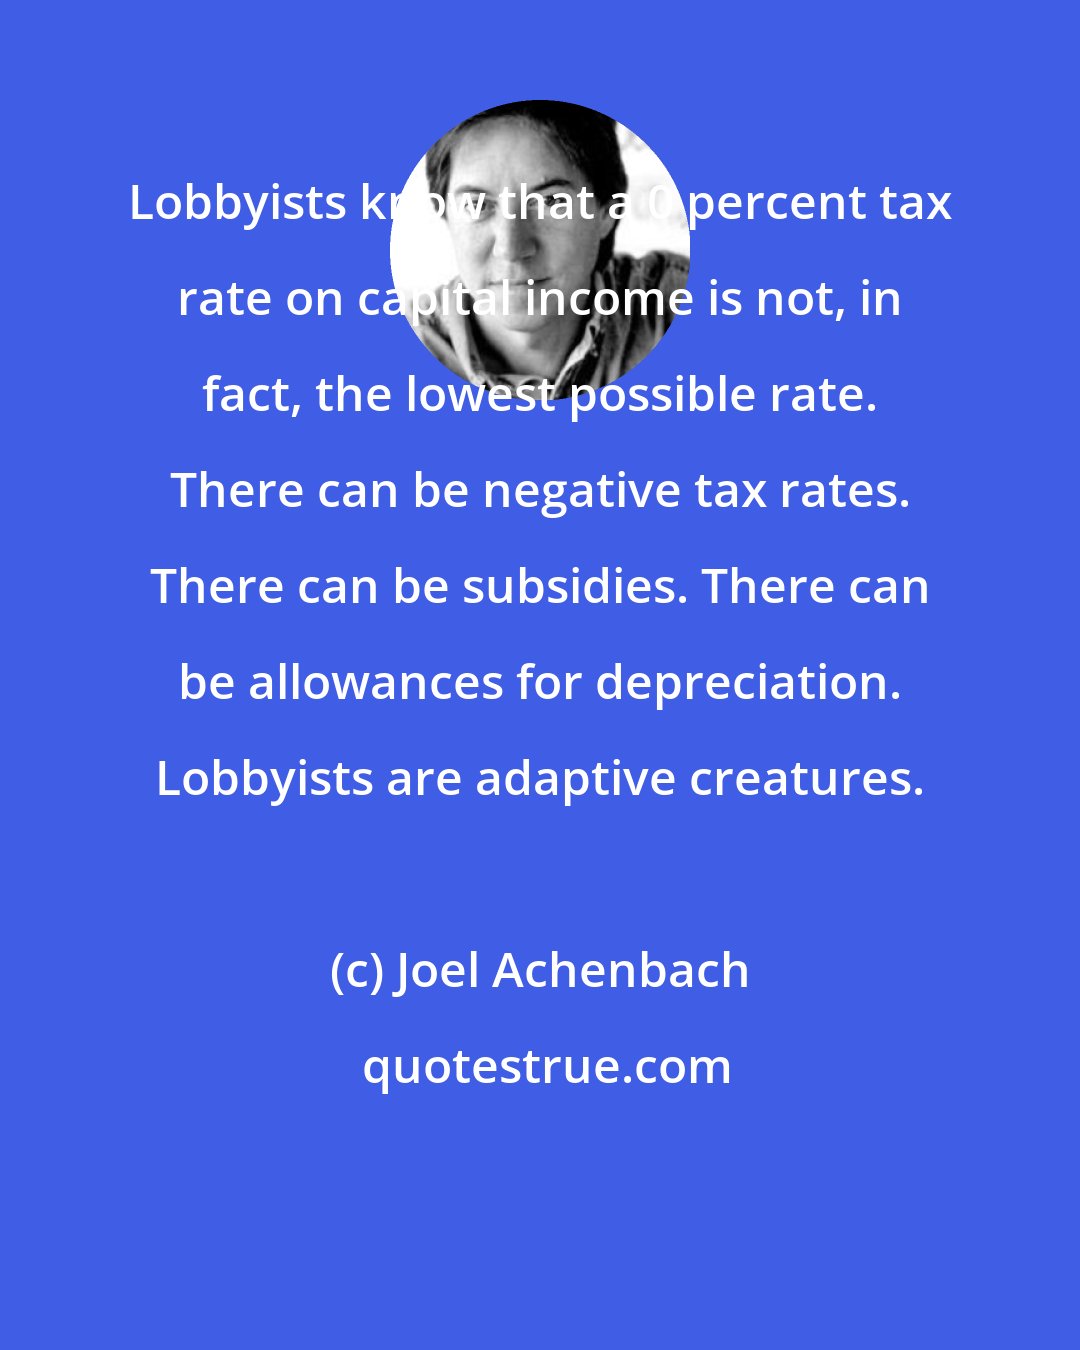 Joel Achenbach: Lobbyists know that a 0 percent tax rate on capital income is not, in fact, the lowest possible rate. There can be negative tax rates. There can be subsidies. There can be allowances for depreciation. Lobbyists are adaptive creatures.